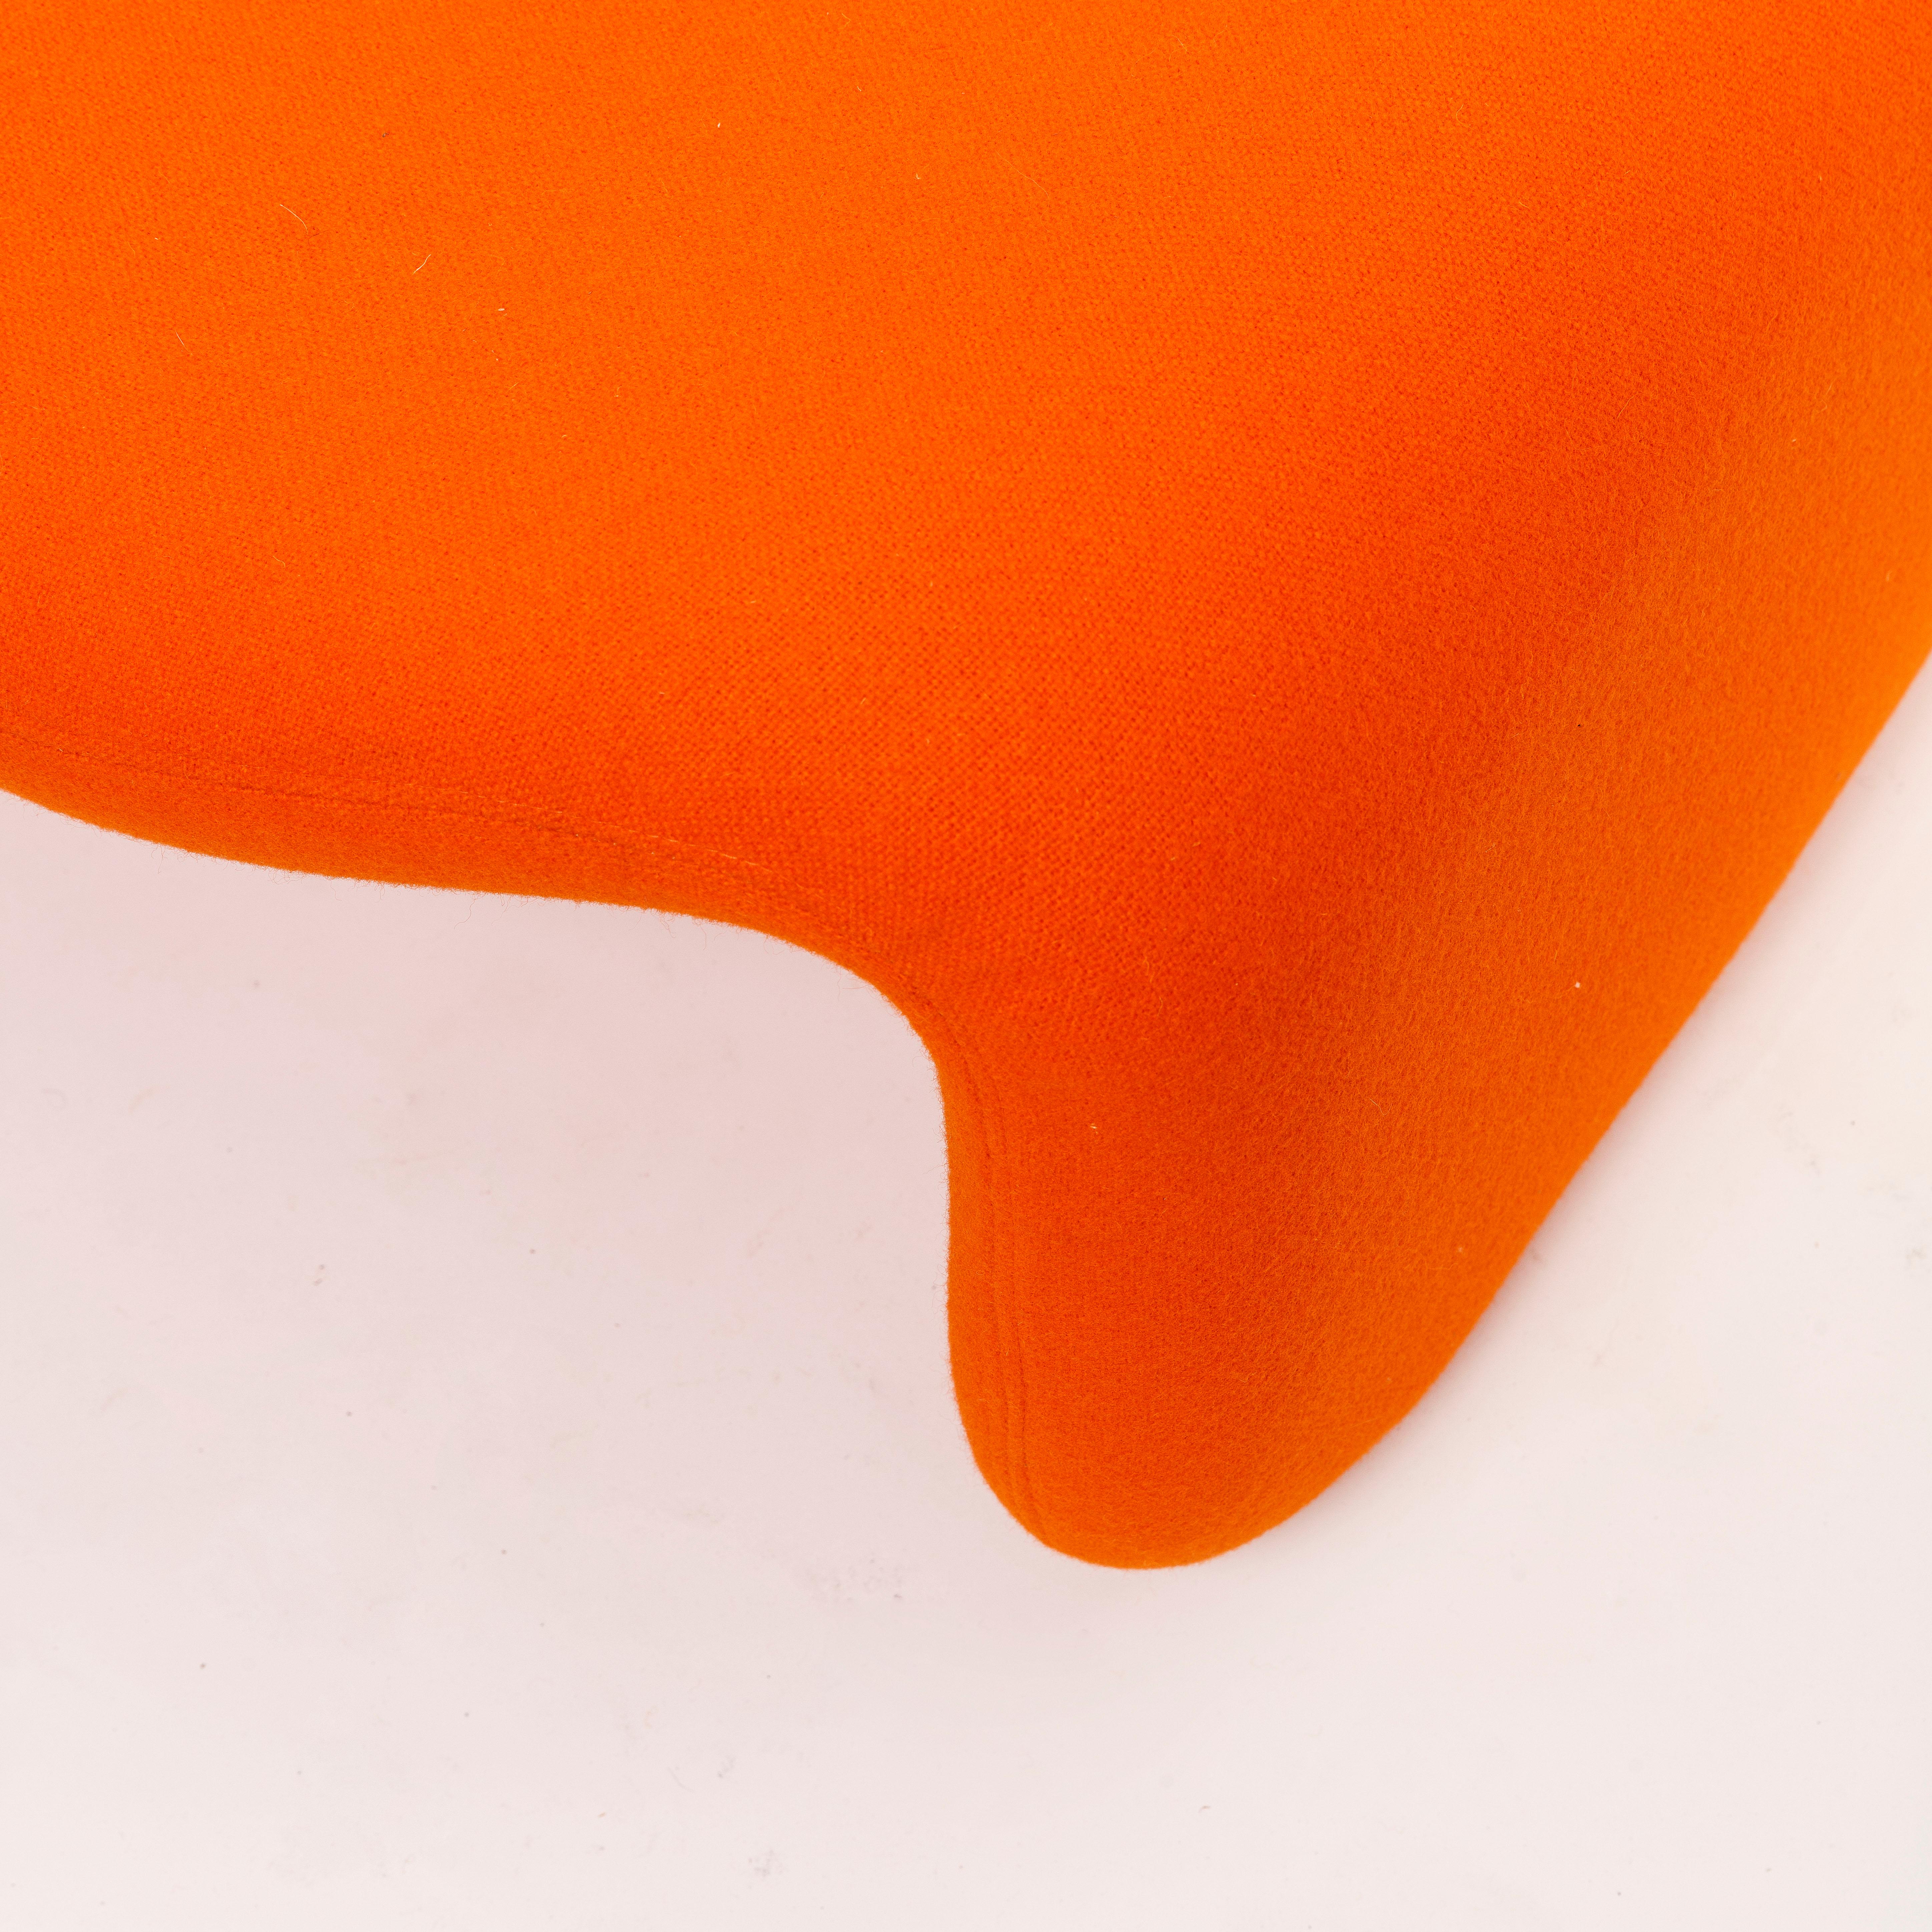 Olivier Mourgue Iconic Djinn Chair Airborne 1963 Reupholstered in Orange Kvadrat For Sale 5